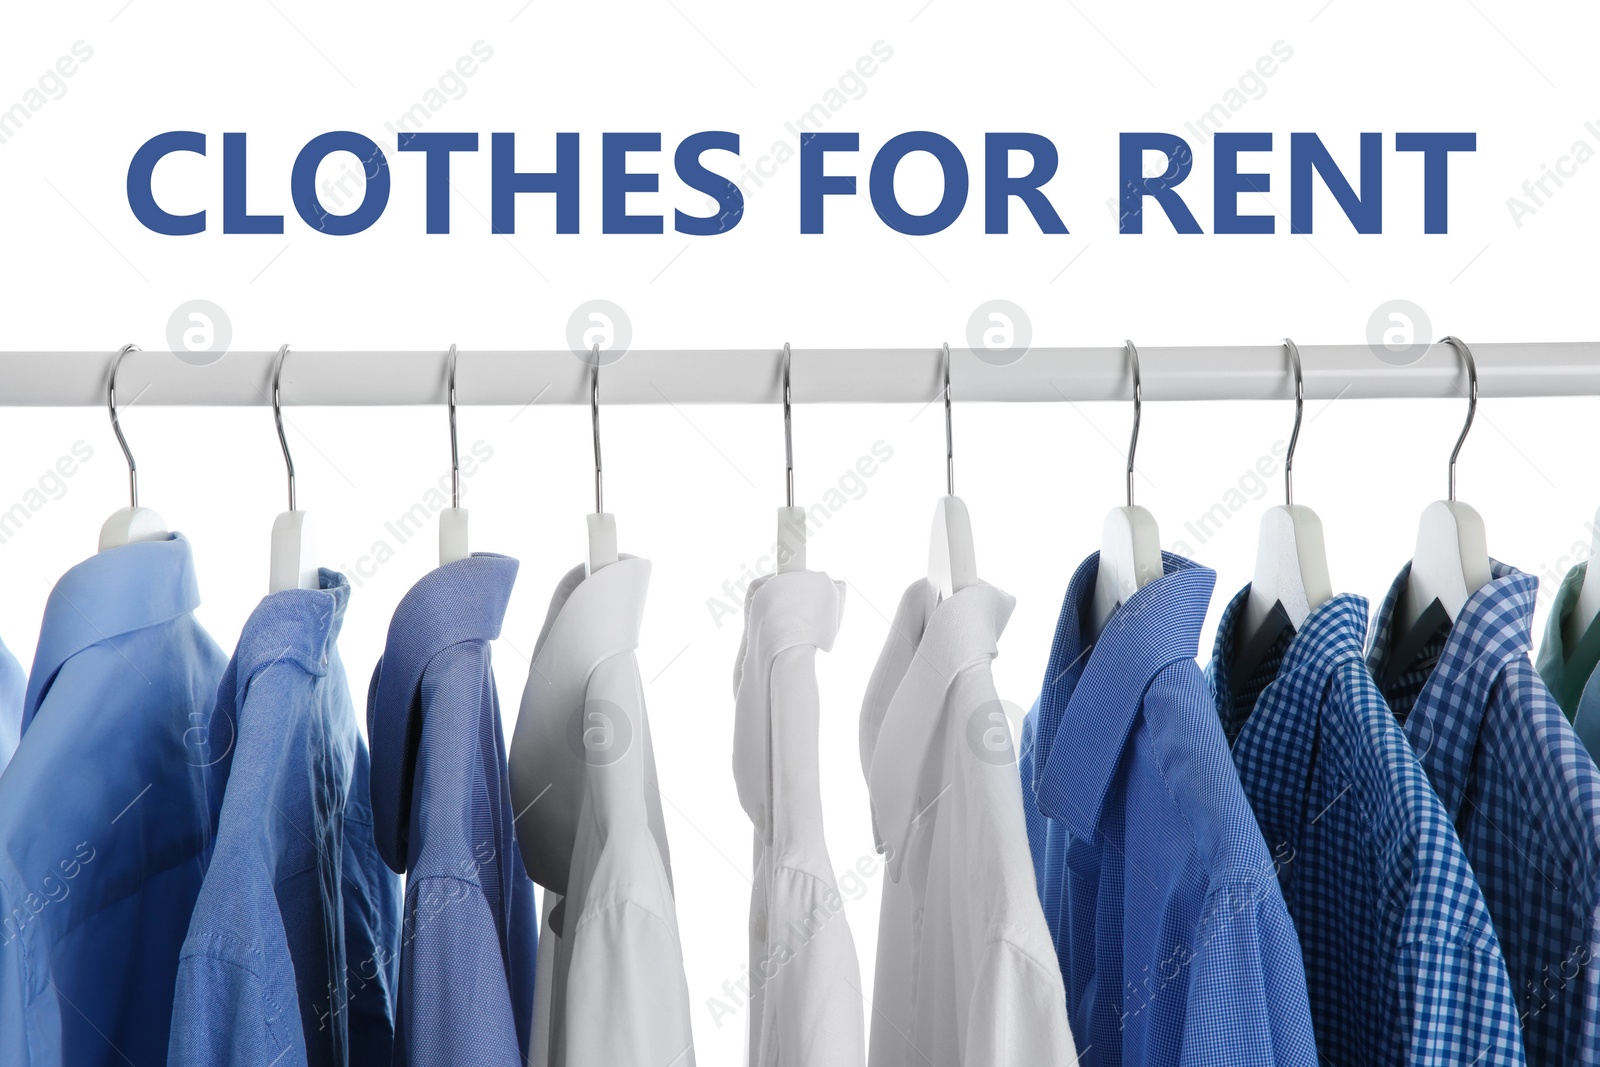 Image of Men clothes for rent hanging on wardrobe rack against white background, closeup